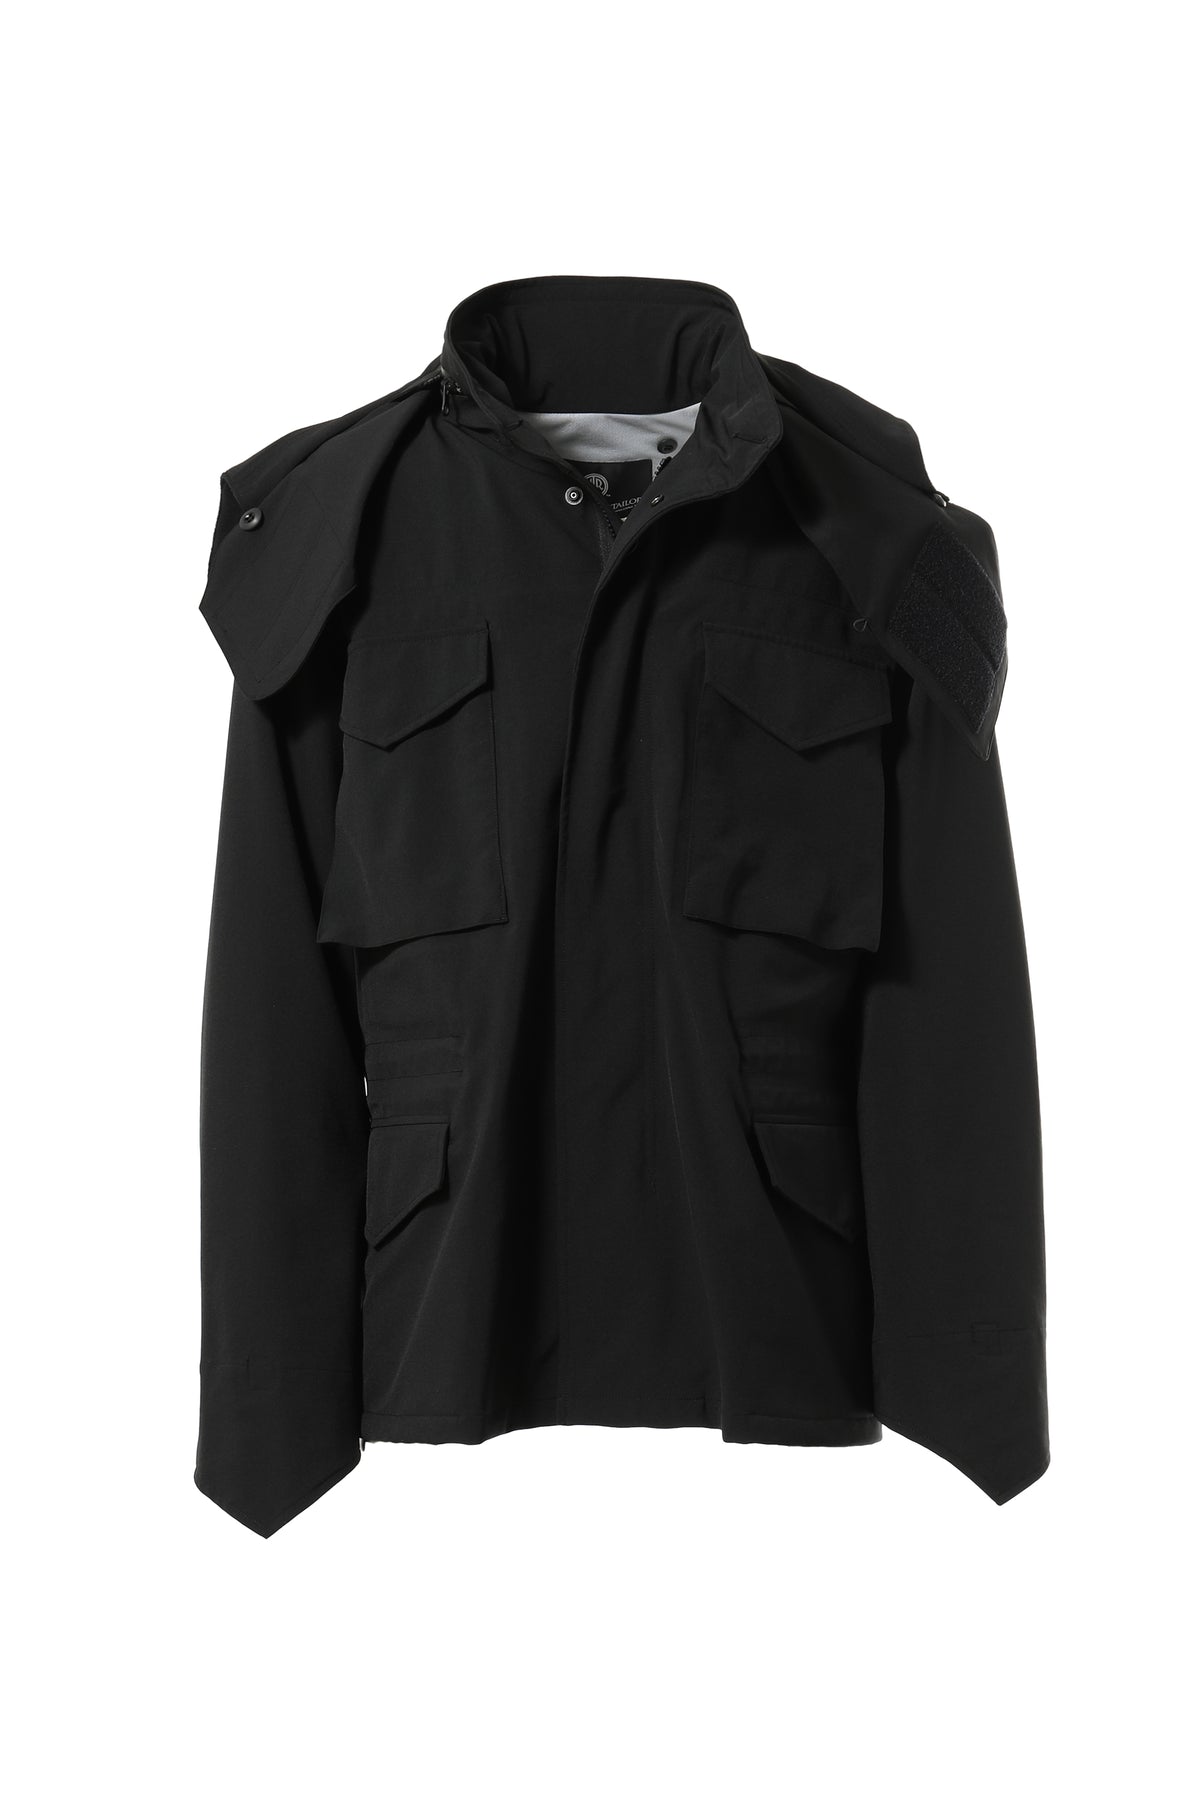 MOUT RECON TAILOR M65 HARD SHELL JACKET / BLK